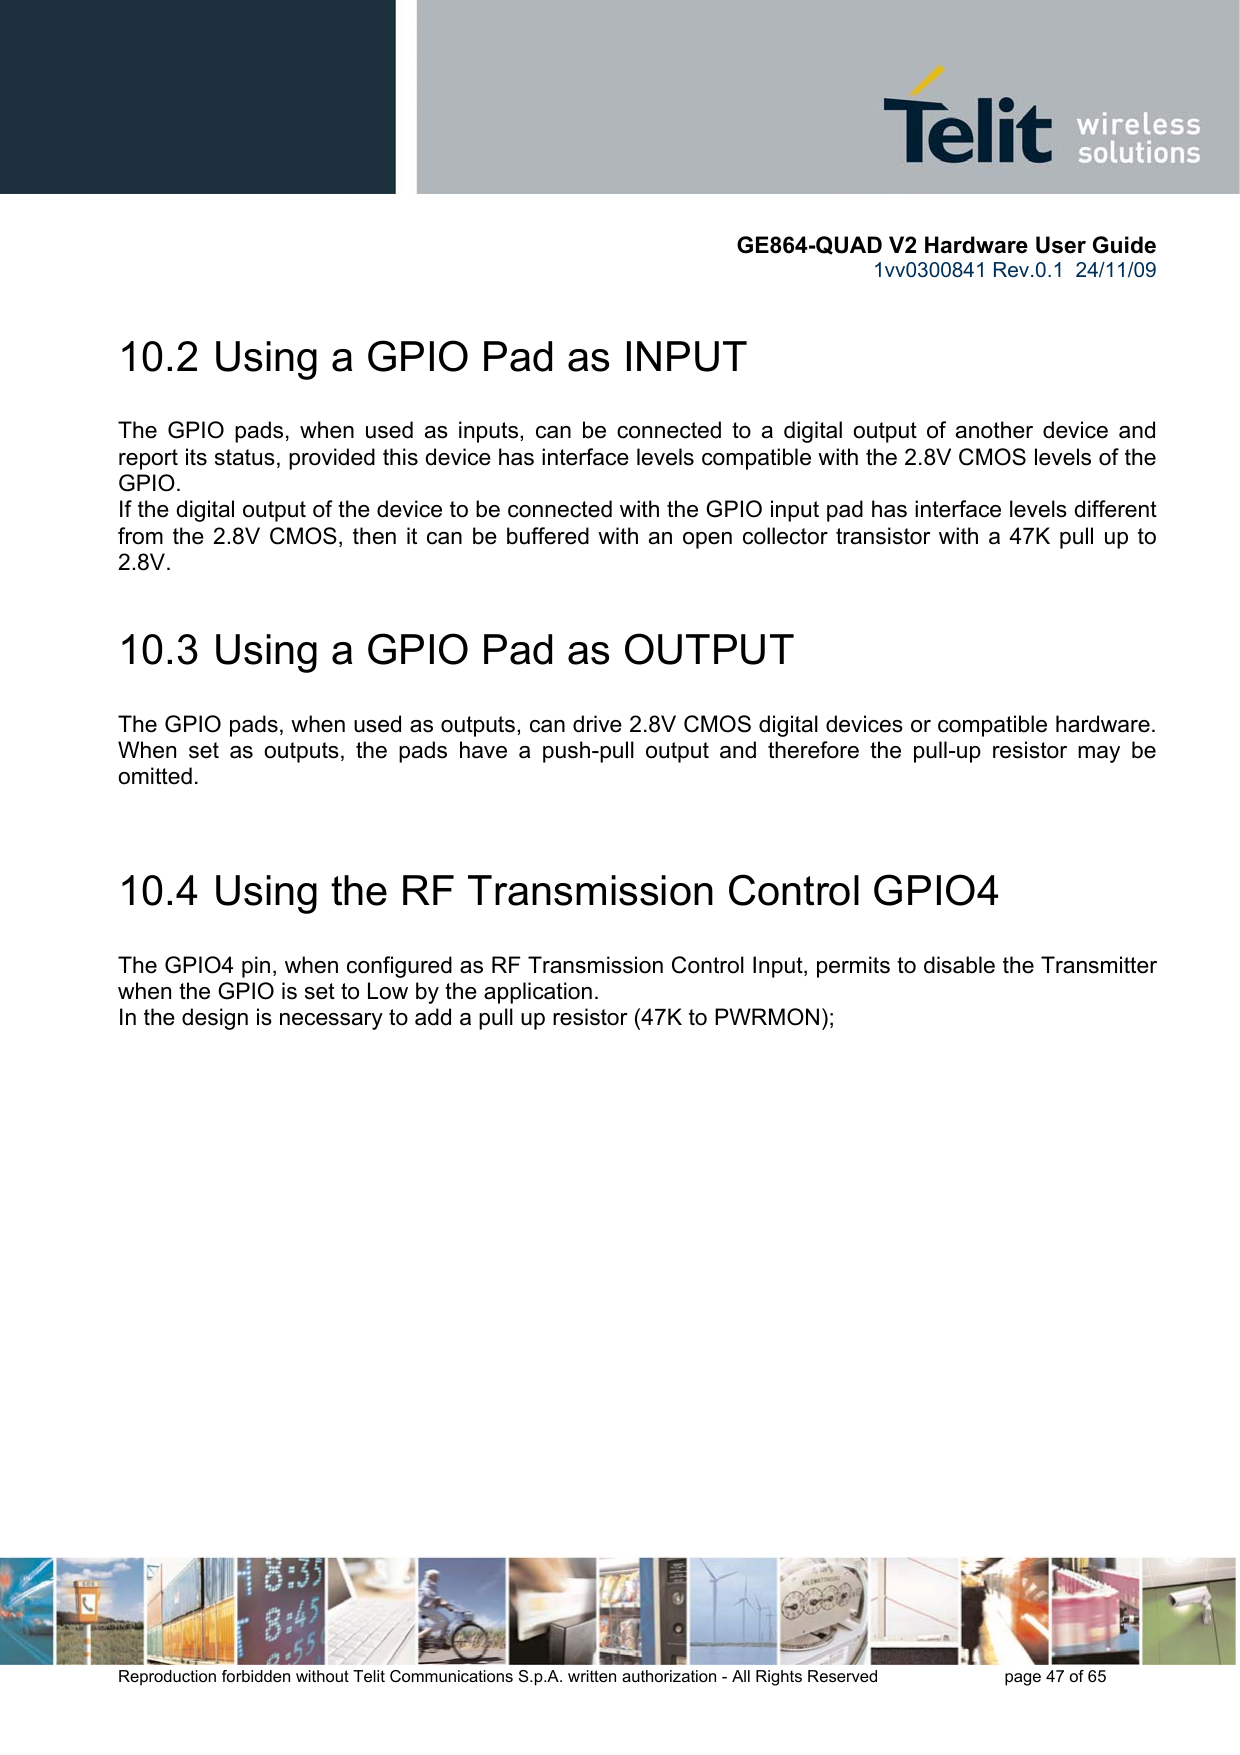       GE864-QUAD V2 Hardware User Guide 1vv0300841 Rev.0.1  24/11/09      Reproduction forbidden without Telit Communications S.p.A. written authorization - All Rights Reserved    page 47 of 65  10.2  Using a GPIO Pad as INPUT The GPIO pads, when used as inputs, can be connected to a digital output of another device and report its status, provided this device has interface levels compatible with the 2.8V CMOS levels of the GPIO.  If the digital output of the device to be connected with the GPIO input pad has interface levels different from the 2.8V CMOS, then it can be buffered with an open collector transistor with a 47K pull up to 2.8V. 10.3  Using a GPIO Pad as OUTPUT The GPIO pads, when used as outputs, can drive 2.8V CMOS digital devices or compatible hardware. When set as outputs, the pads have a push-pull output and therefore the pull-up resistor may be omitted.  10.4  Using the RF Transmission Control GPIO4 The GPIO4 pin, when configured as RF Transmission Control Input, permits to disable the Transmitter when the GPIO is set to Low by the application. In the design is necessary to add a pull up resistor (47K to PWRMON);     